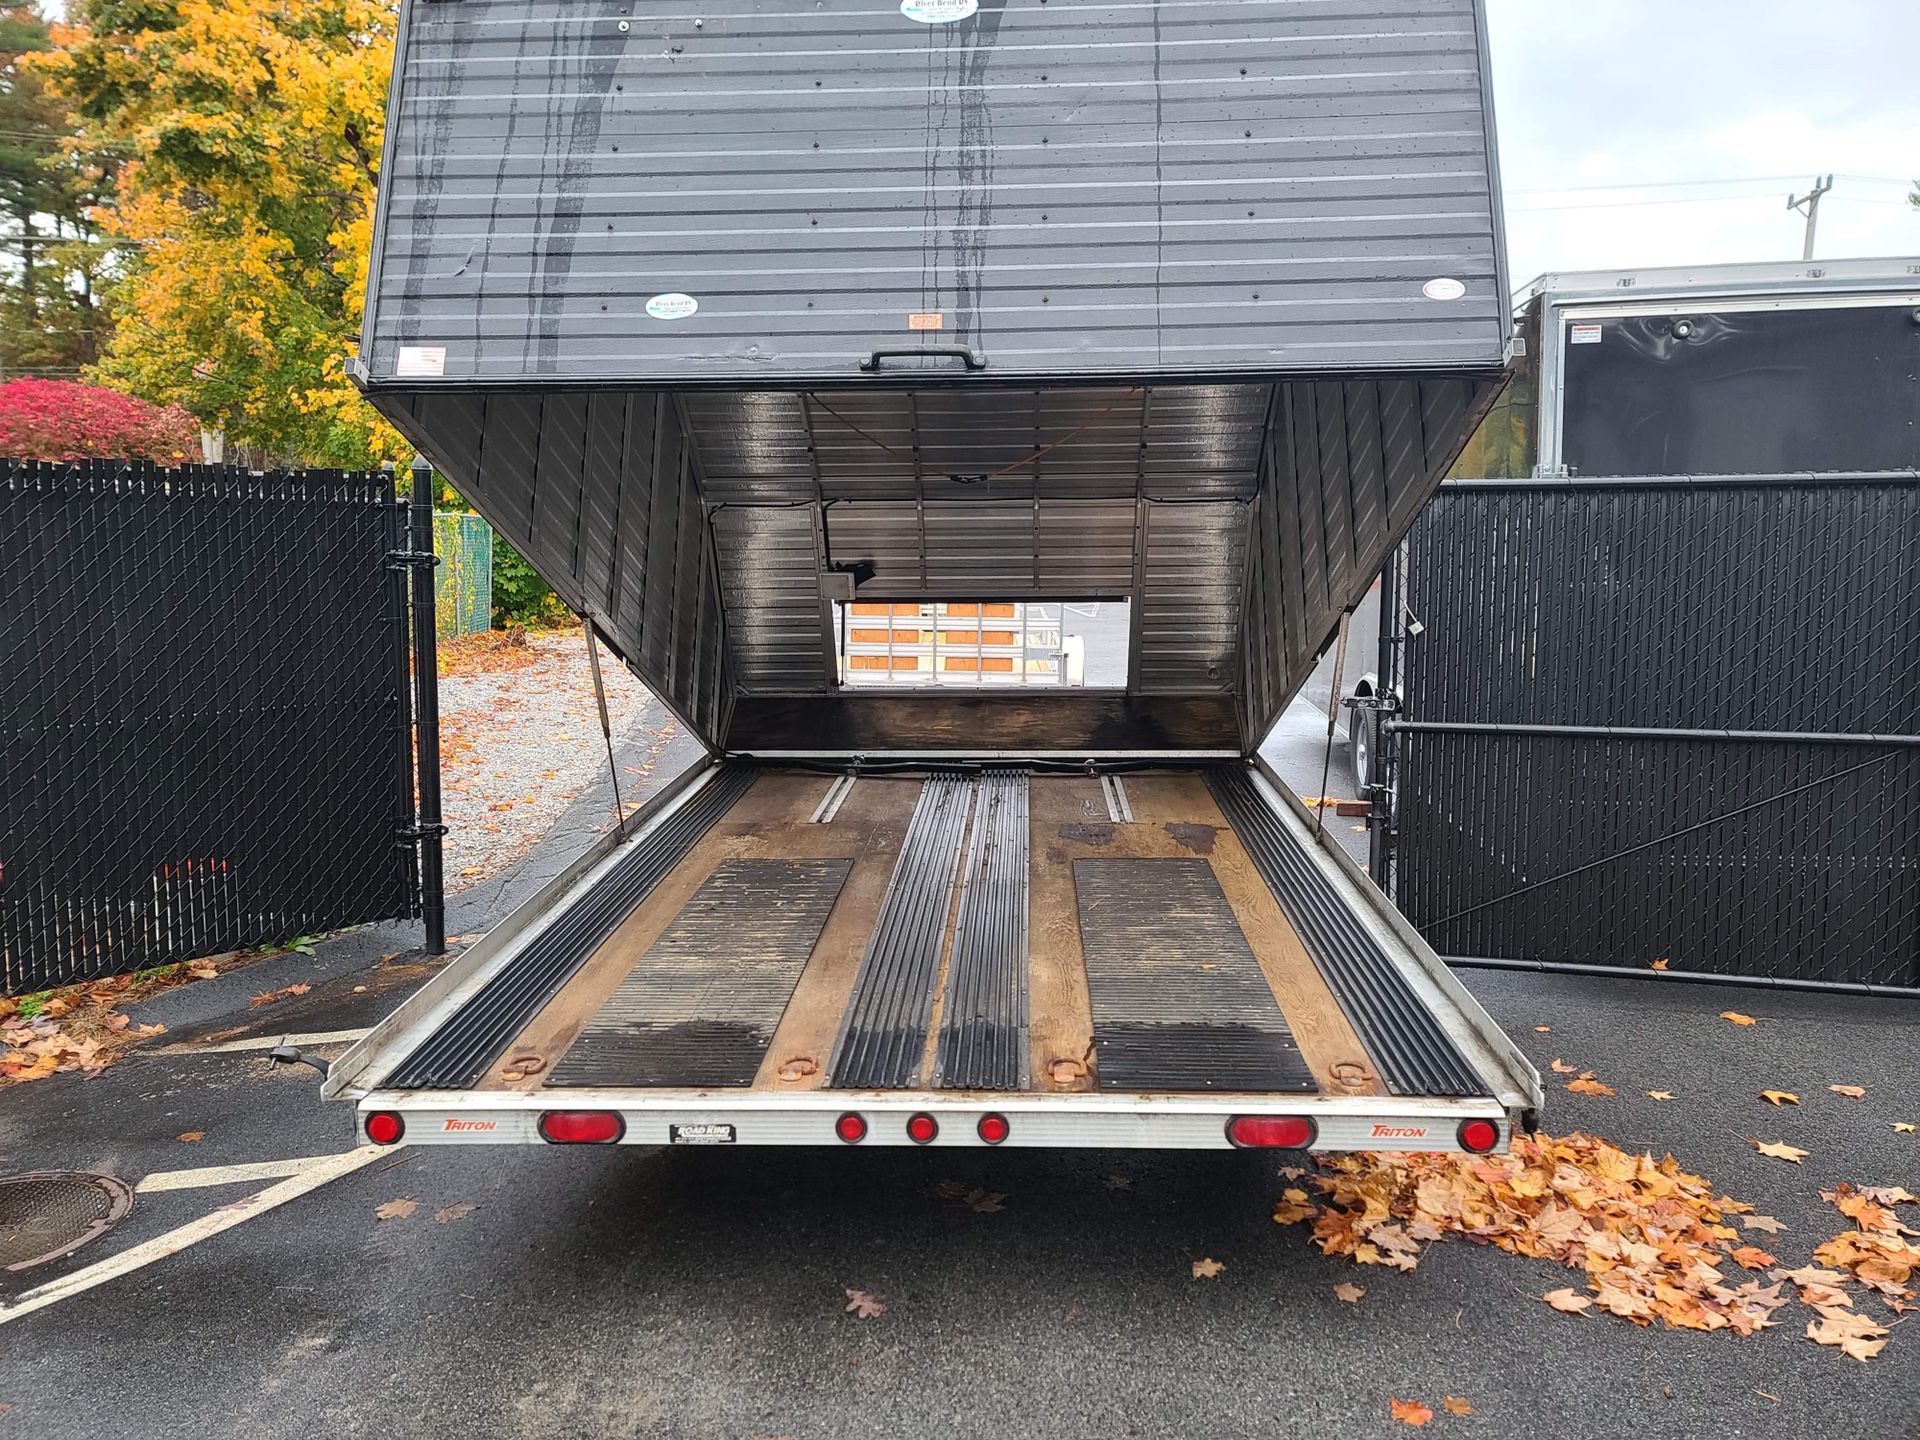 2005 Triton 12’x101” enclosed clamshell 2 place all aluminum trailer